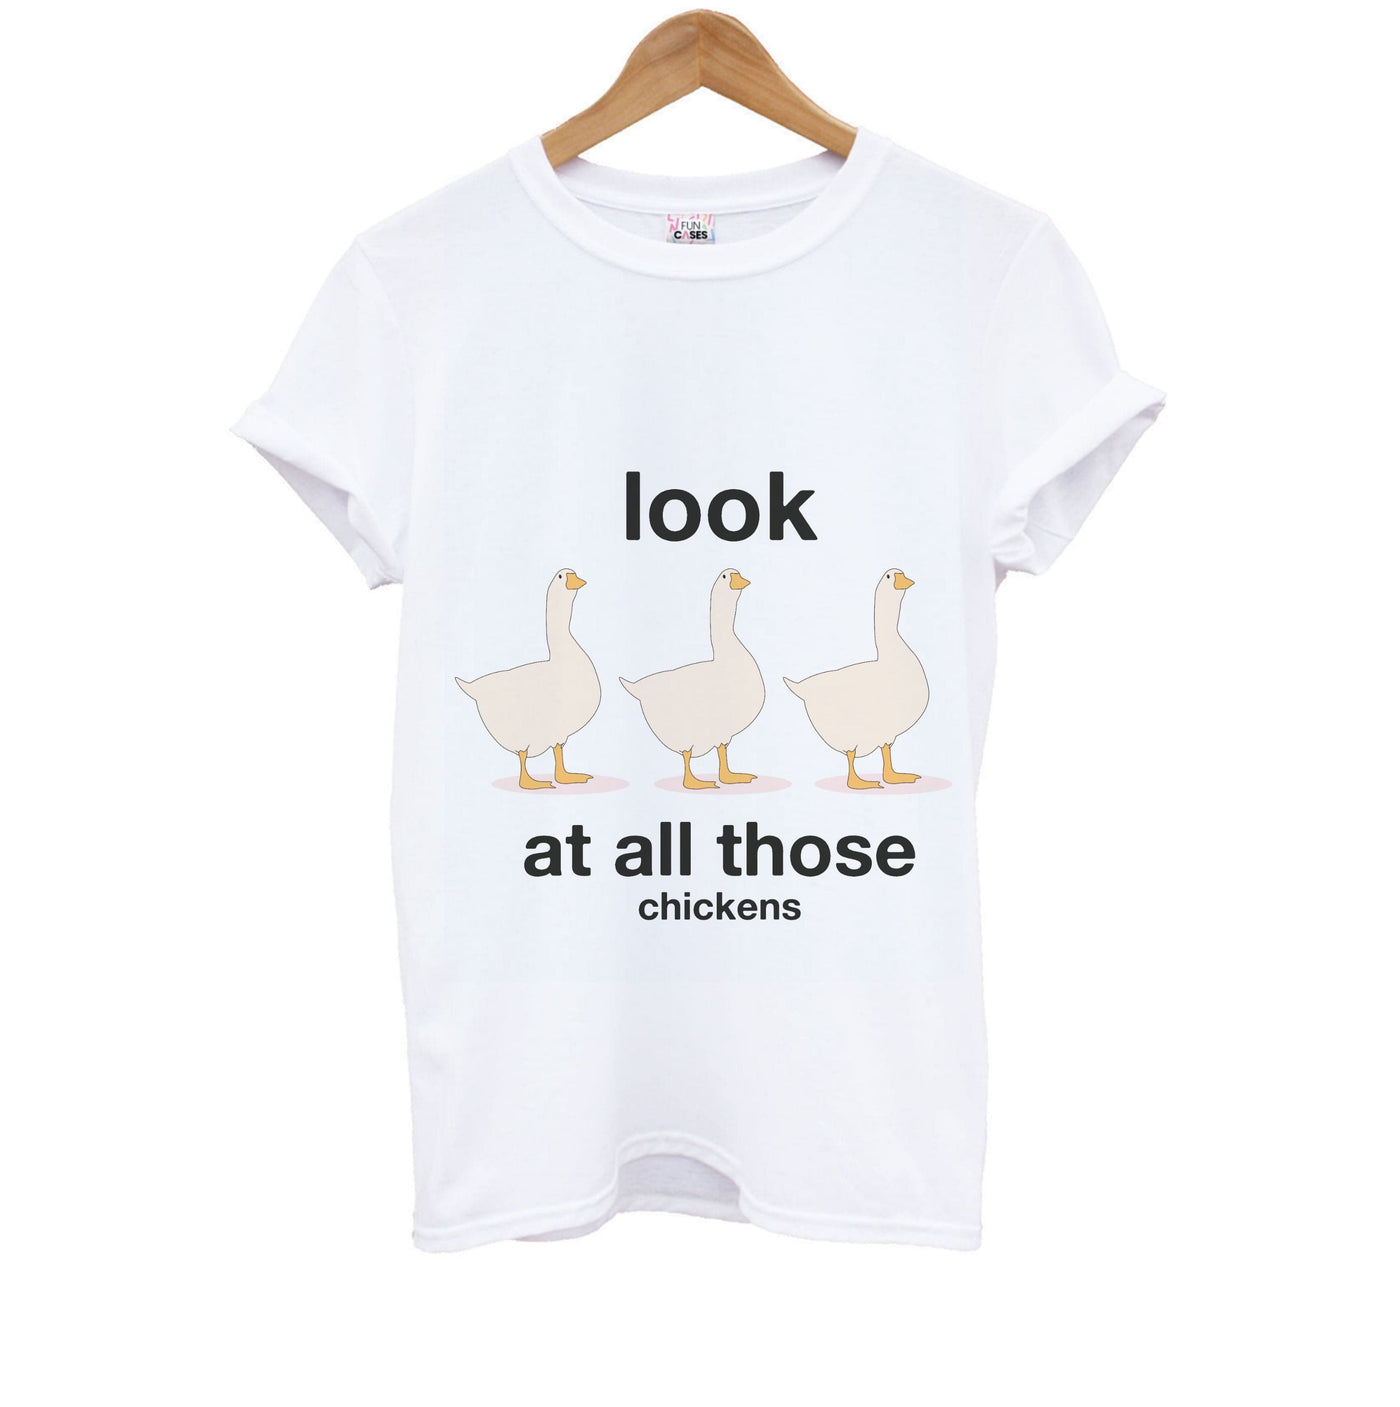 Look At All Those Chickens - Memes Kids T-Shirt